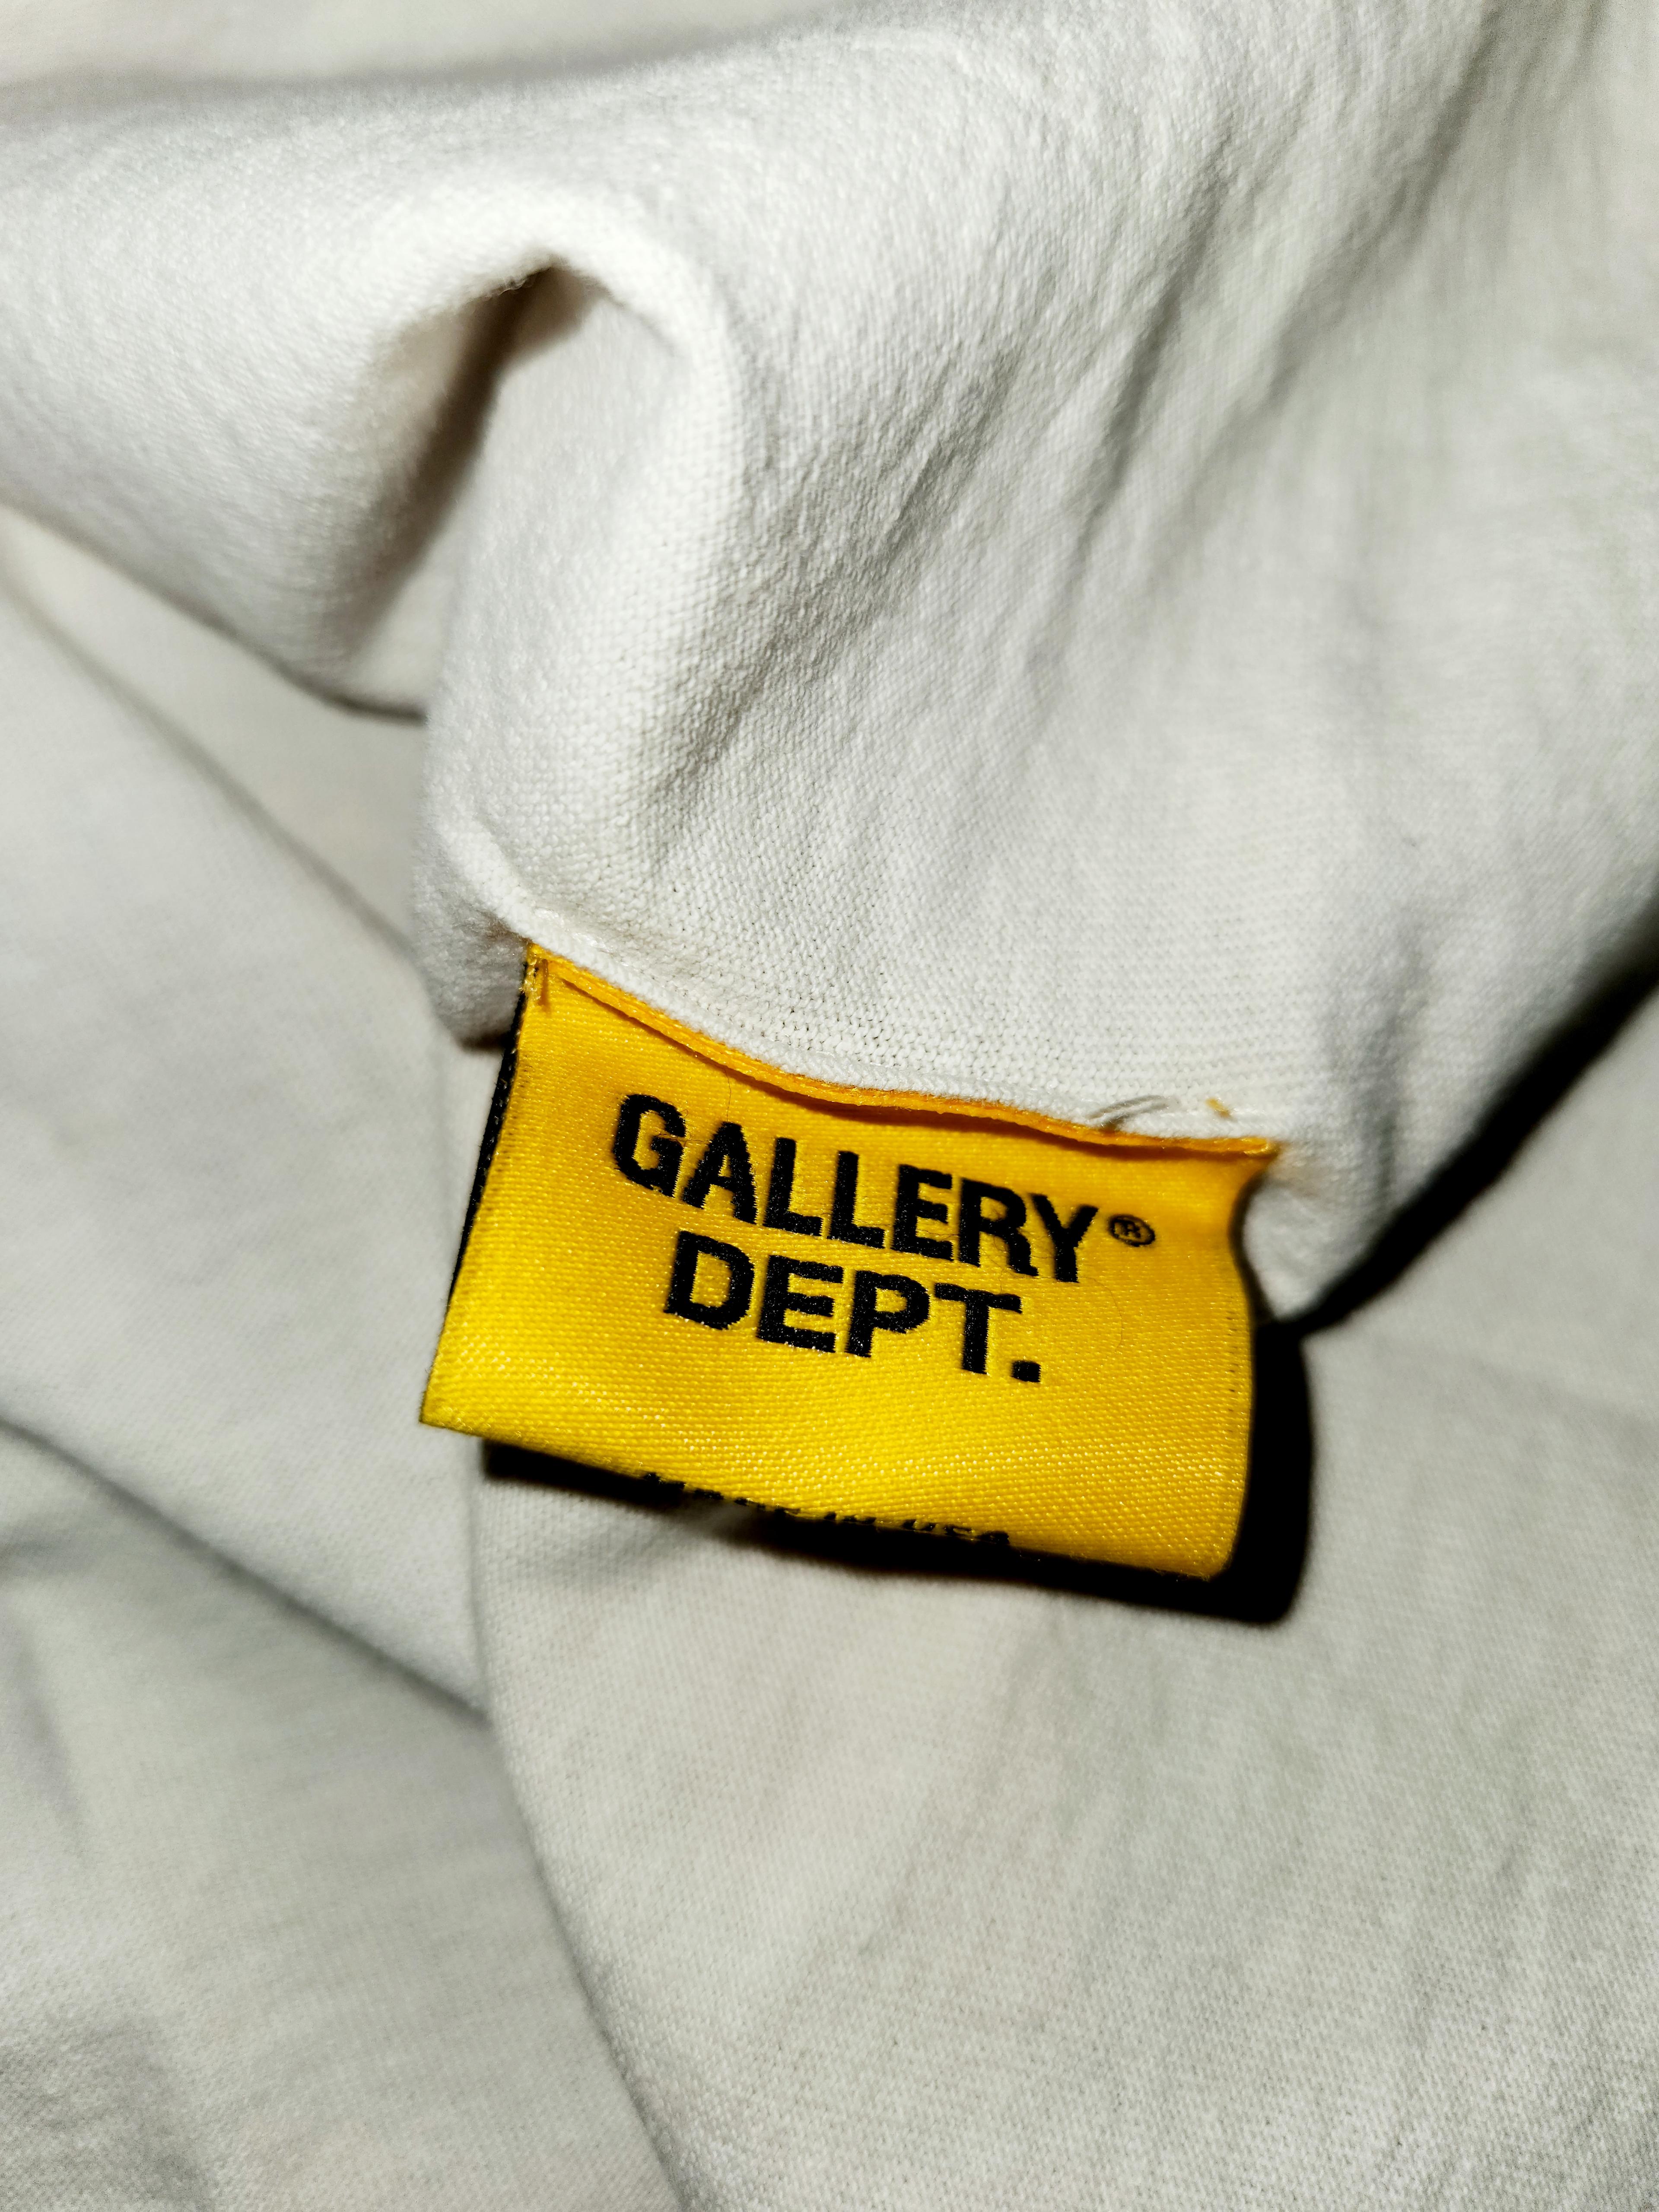 Alternate View 6 of Gallery Dept. G Ball T-Shirt Distressed